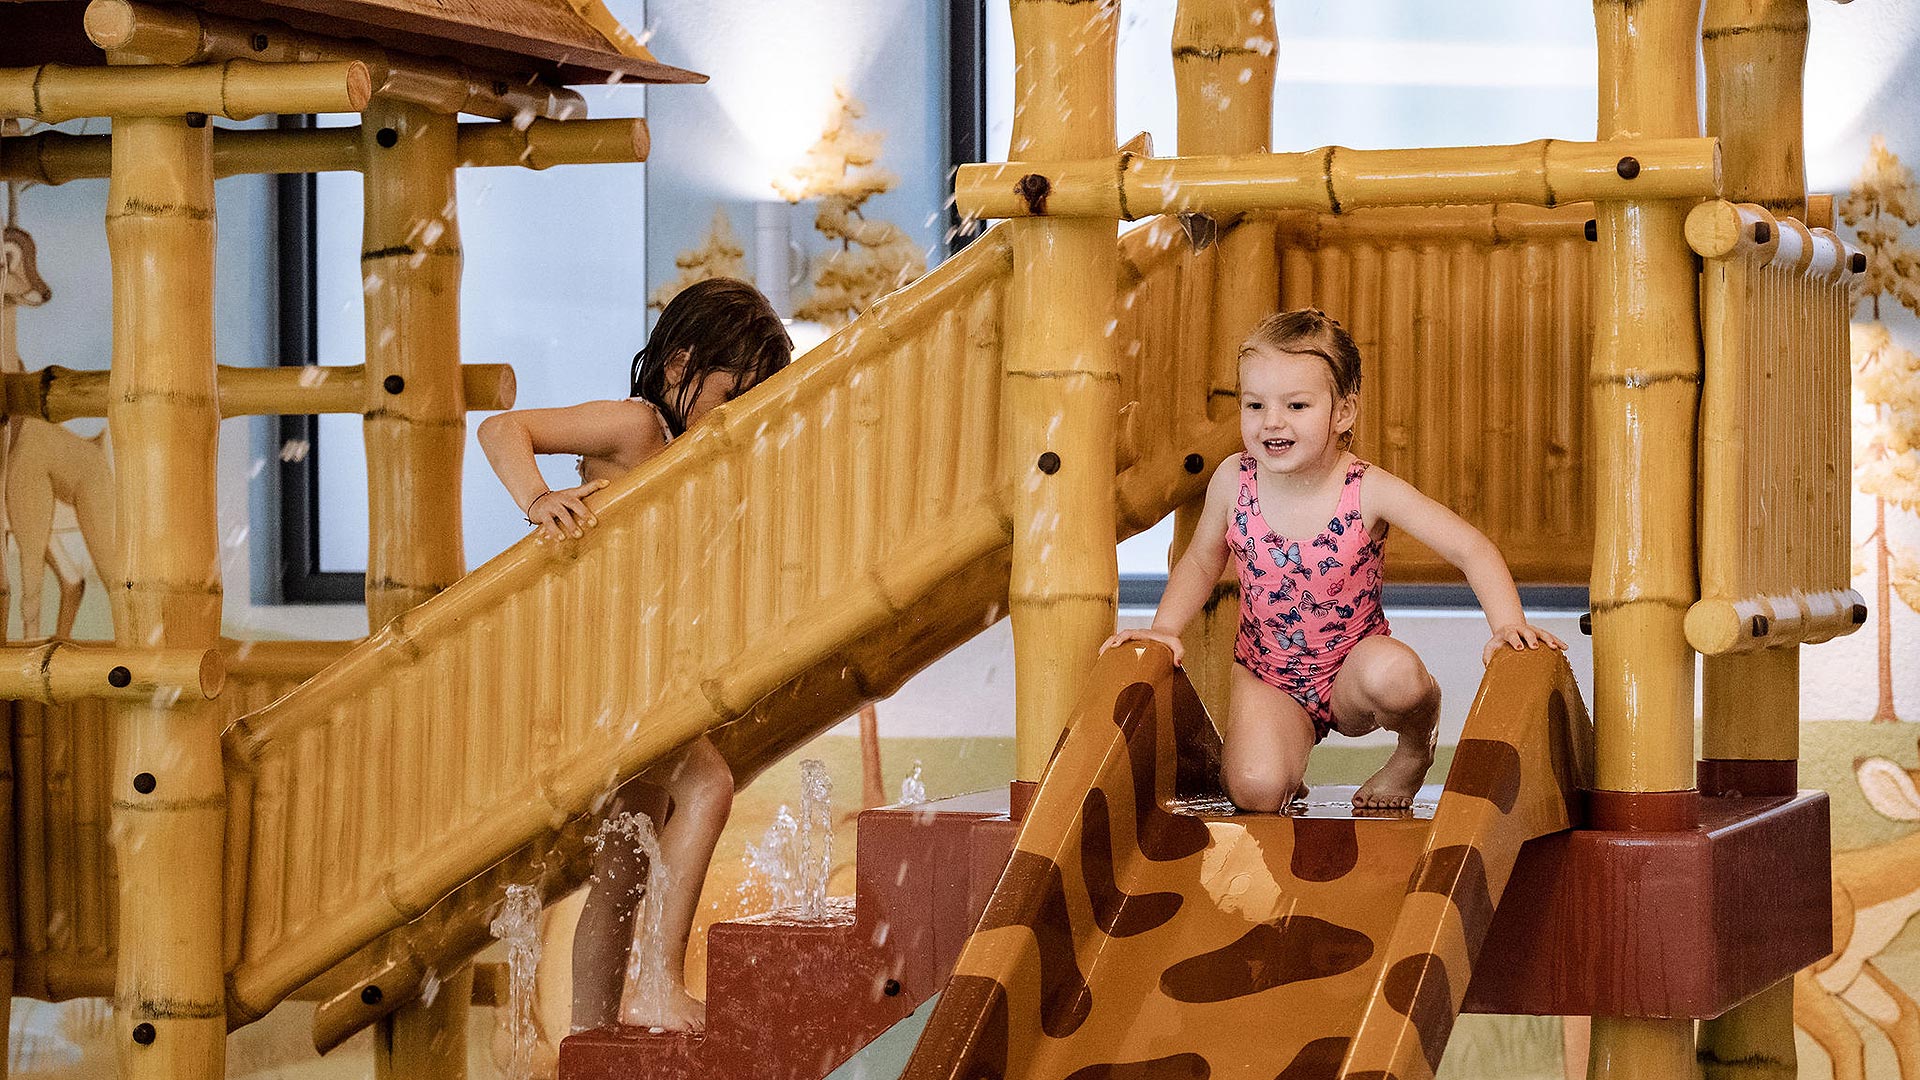 AlpHoliday Family Hotel with SPA in Trentino has a water playground to delight the little ones.